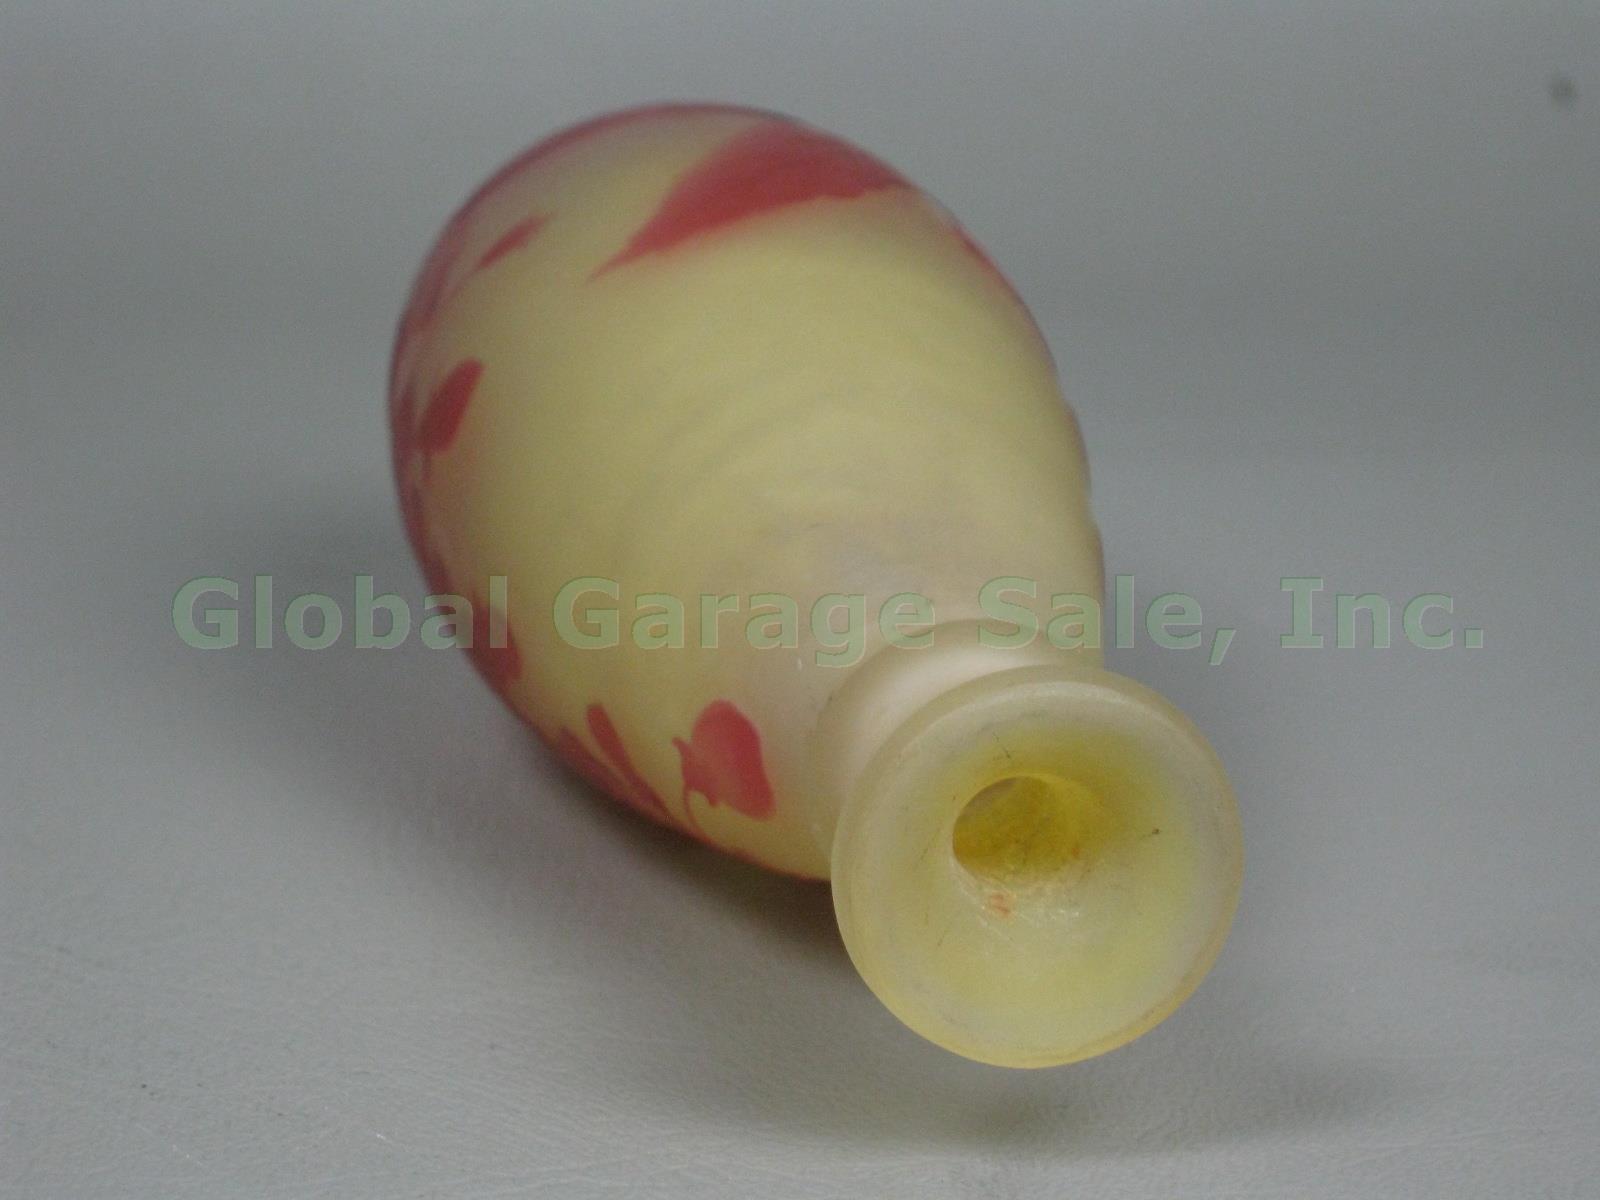 Antique Emile Galle Signed Cameo Art Glass Perfume Bottle Bud Vase Red & Yellow 8